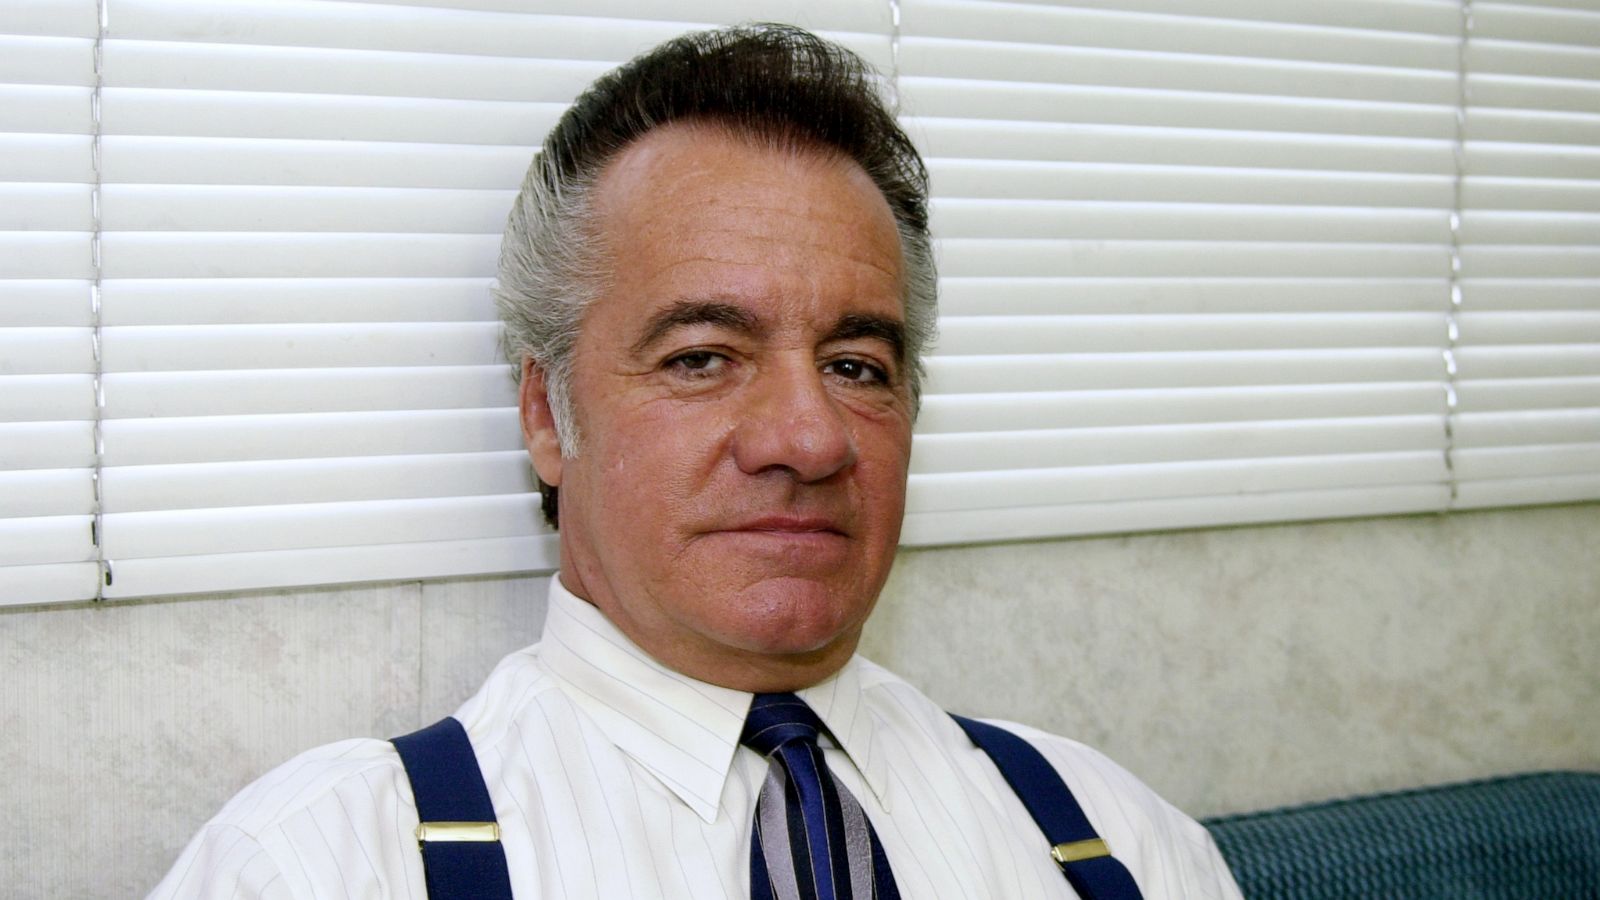 At the age of 79, Tony Sirico, star of the HBO series "The Sopranos," passed away